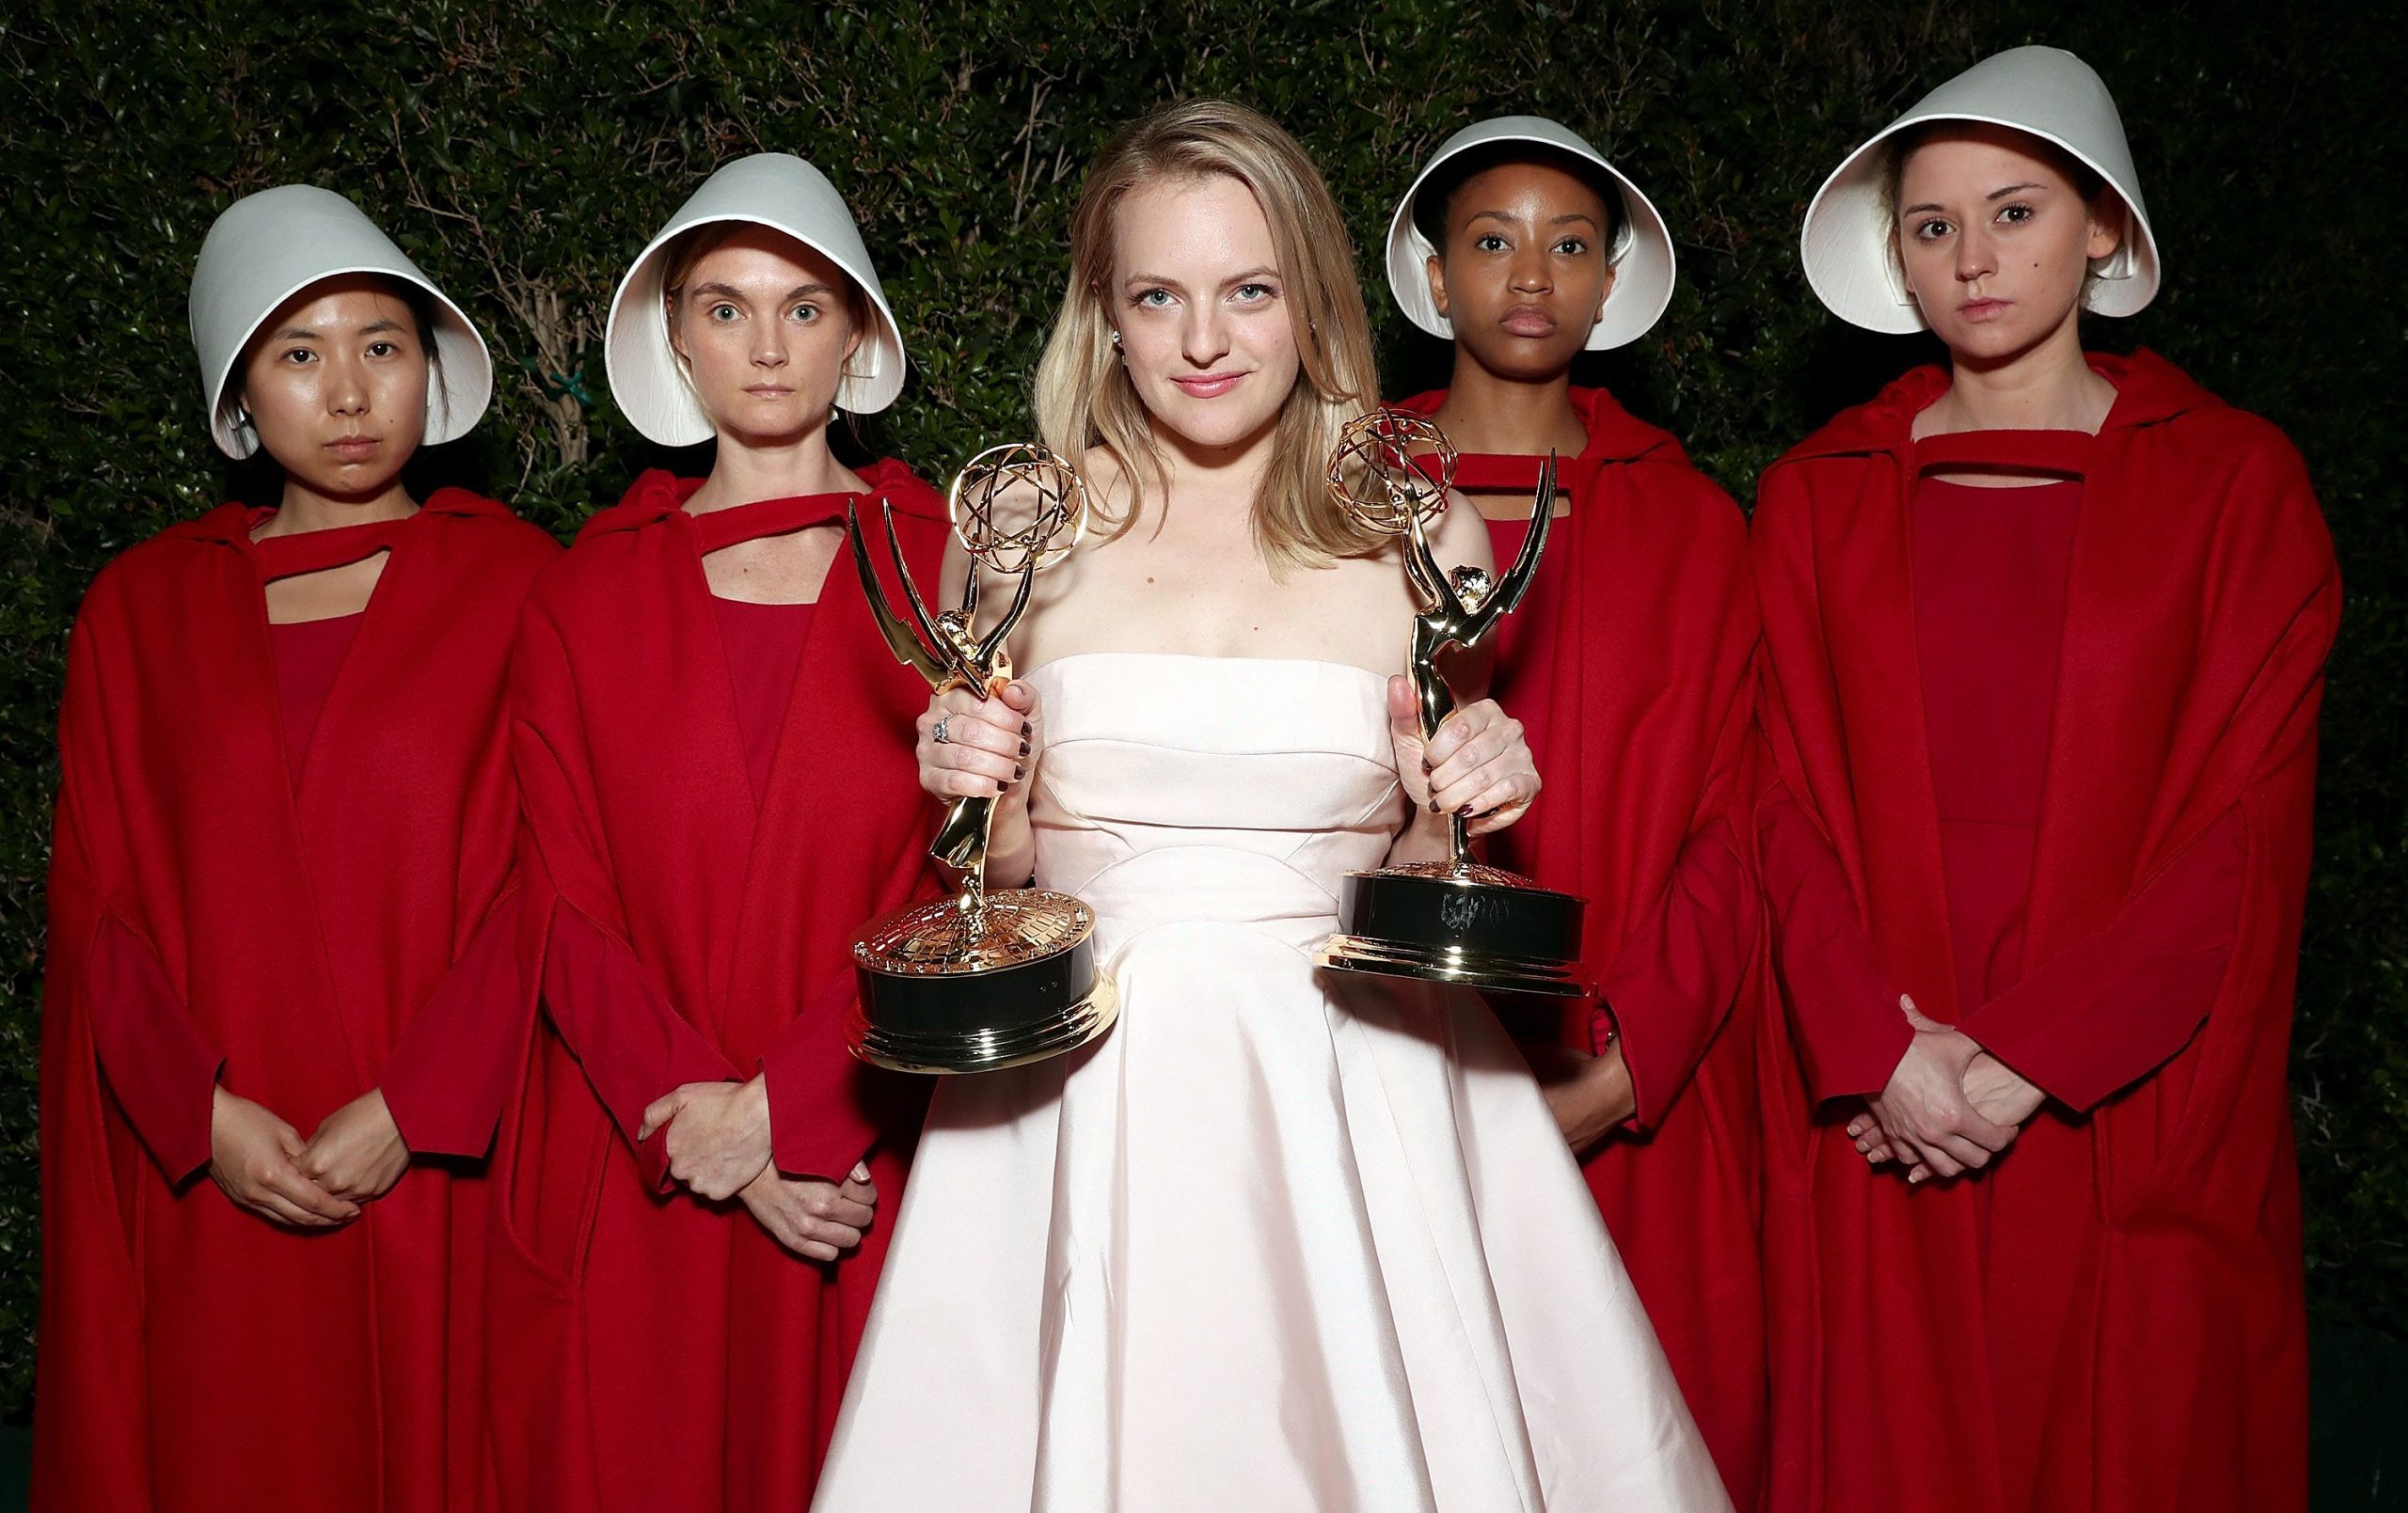 Where Is ‘The Handmaid’s Tale’ Filmed? About Series And Filming Locations